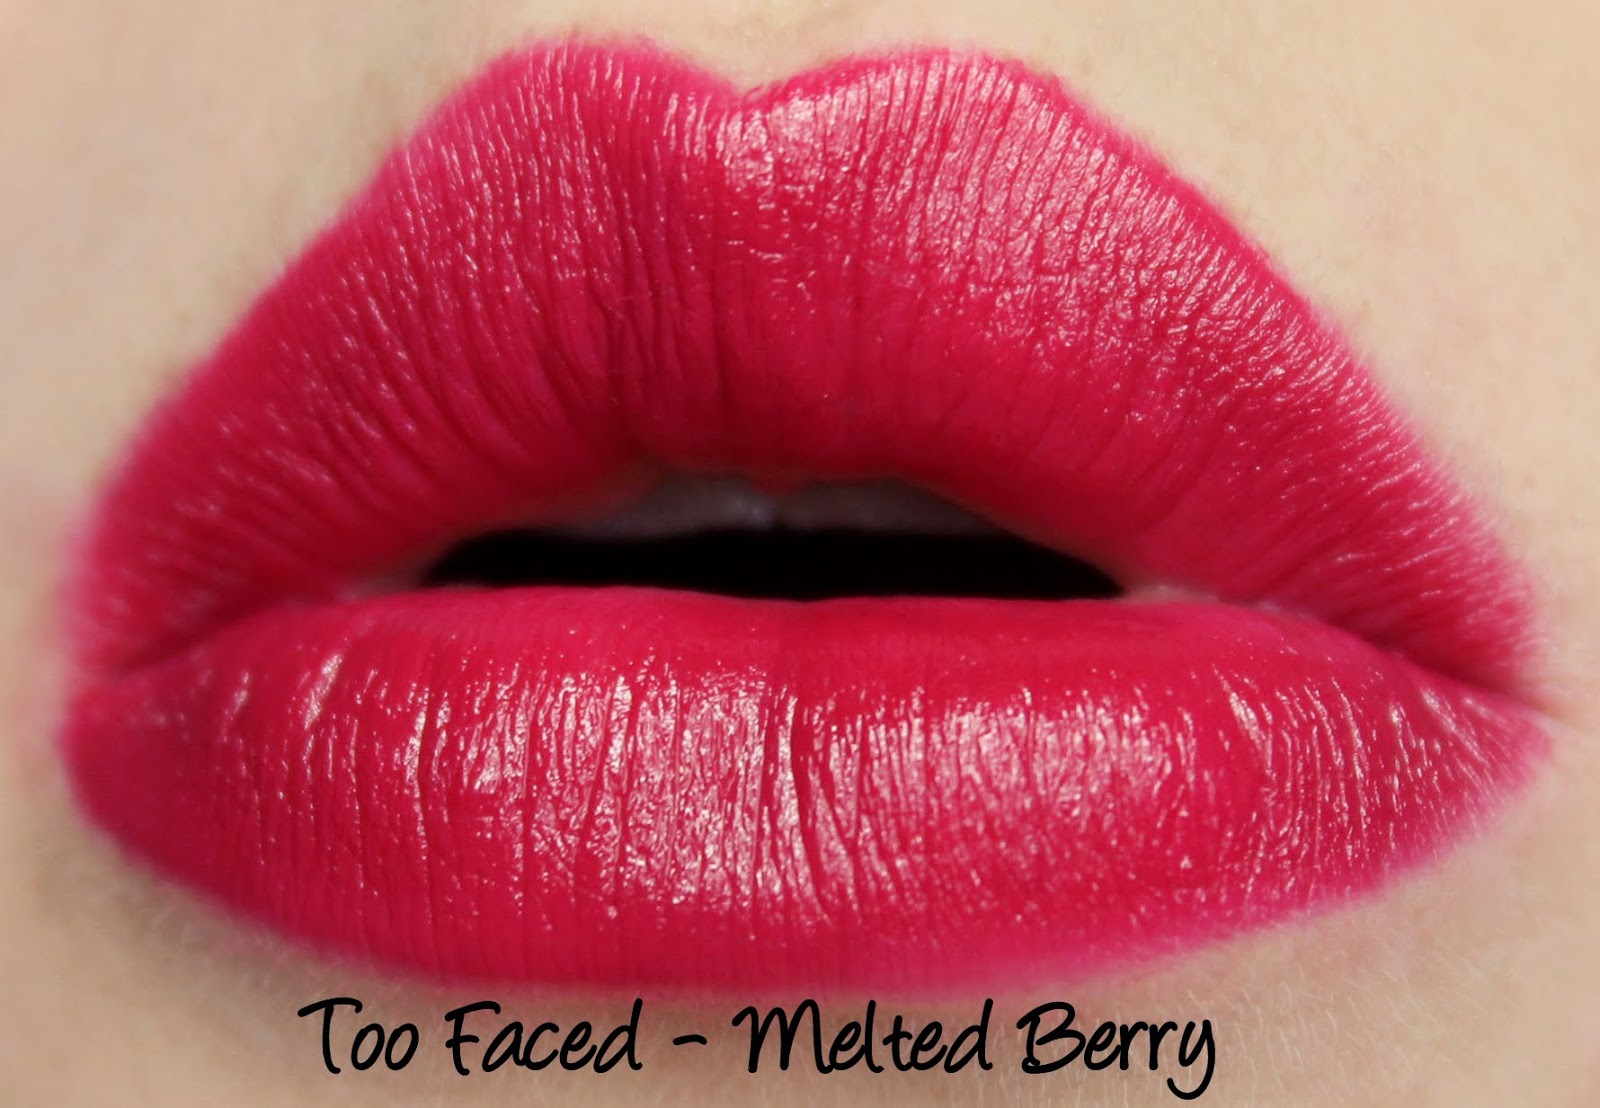 Too Faced Melted Berry Swatches & Review